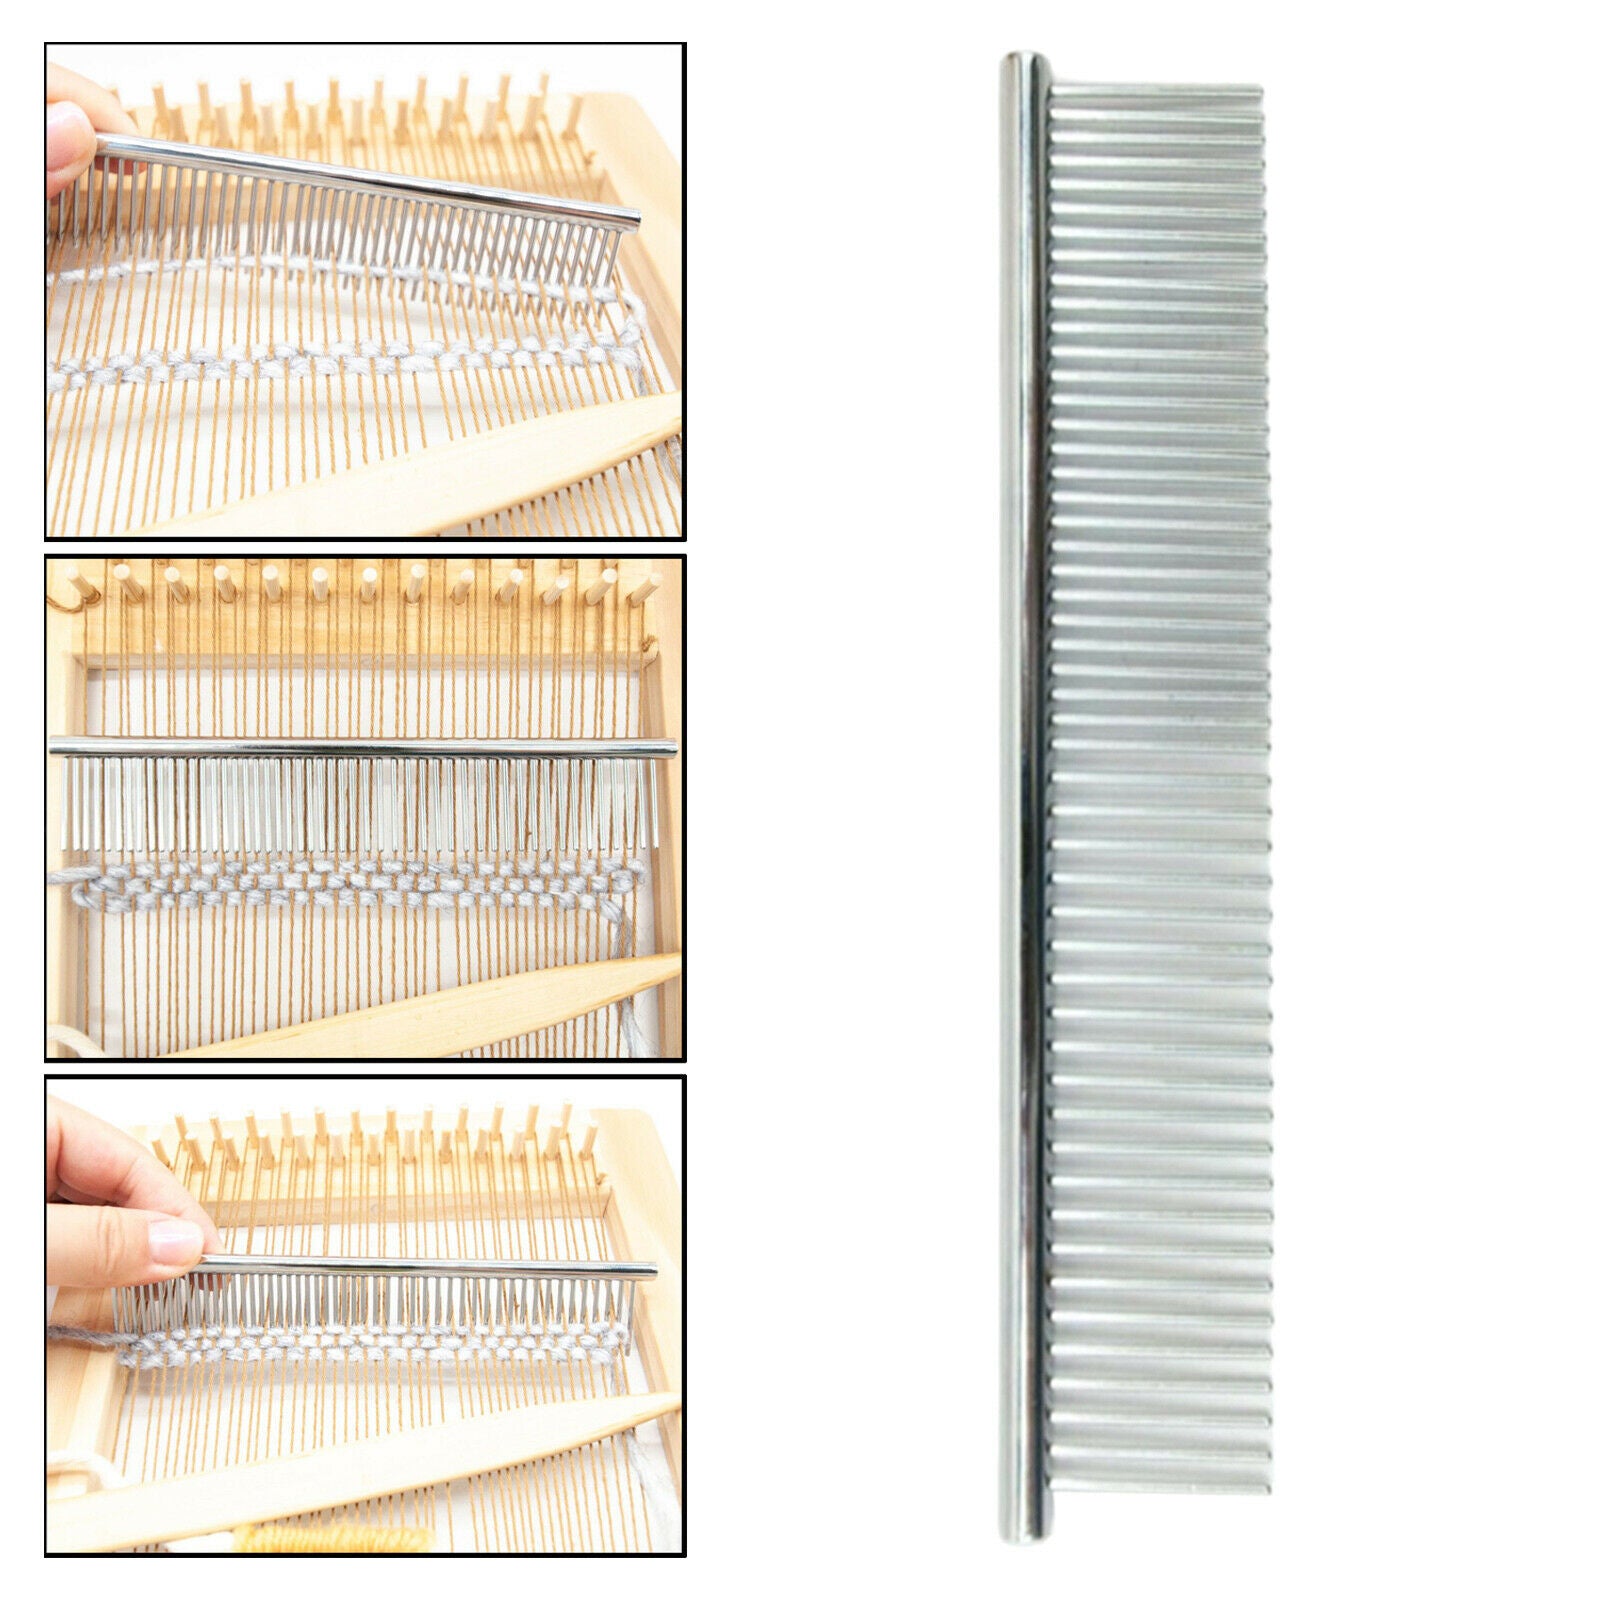 Anti-static Stainless Steel Macrame Fringe Comb Professional Knotting Tools